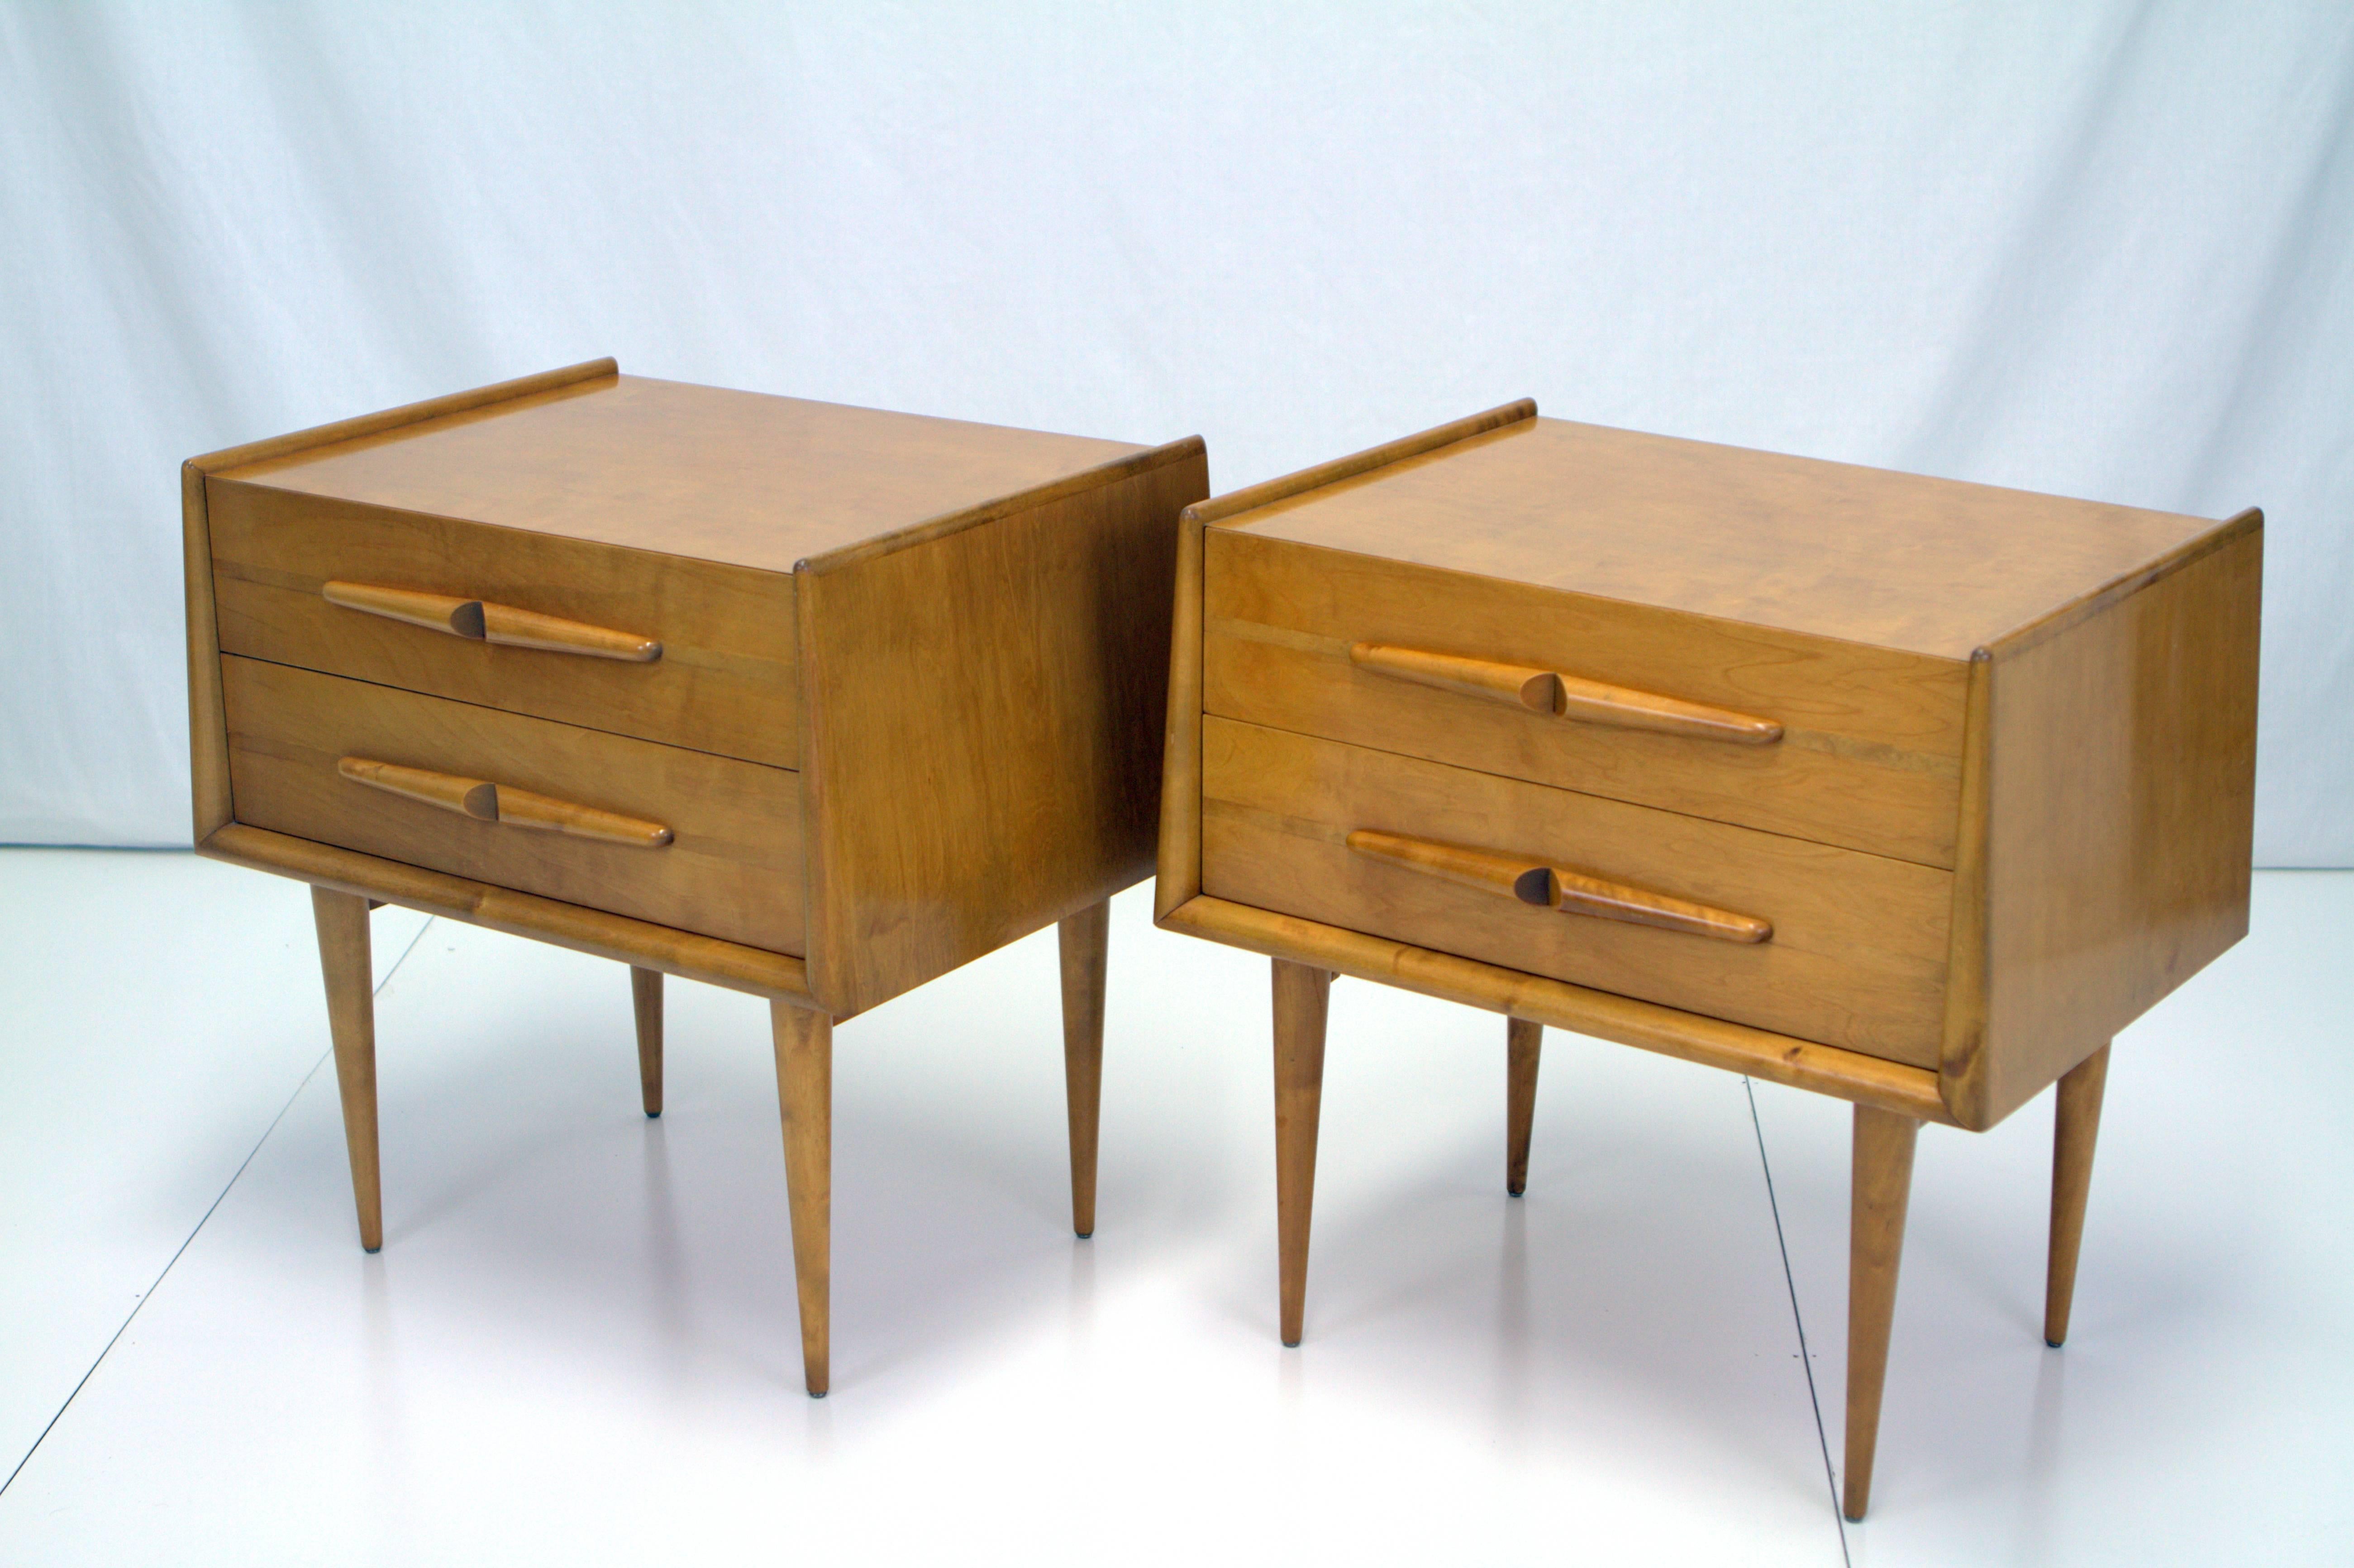 Edmund Spence pair of birch nightstands with sculptural pulls. Superior construction details like Maple wood bands along pulls and inside mitered top drawer to create seamless finish set these apart. Rounded edges taper up while resting on thin and